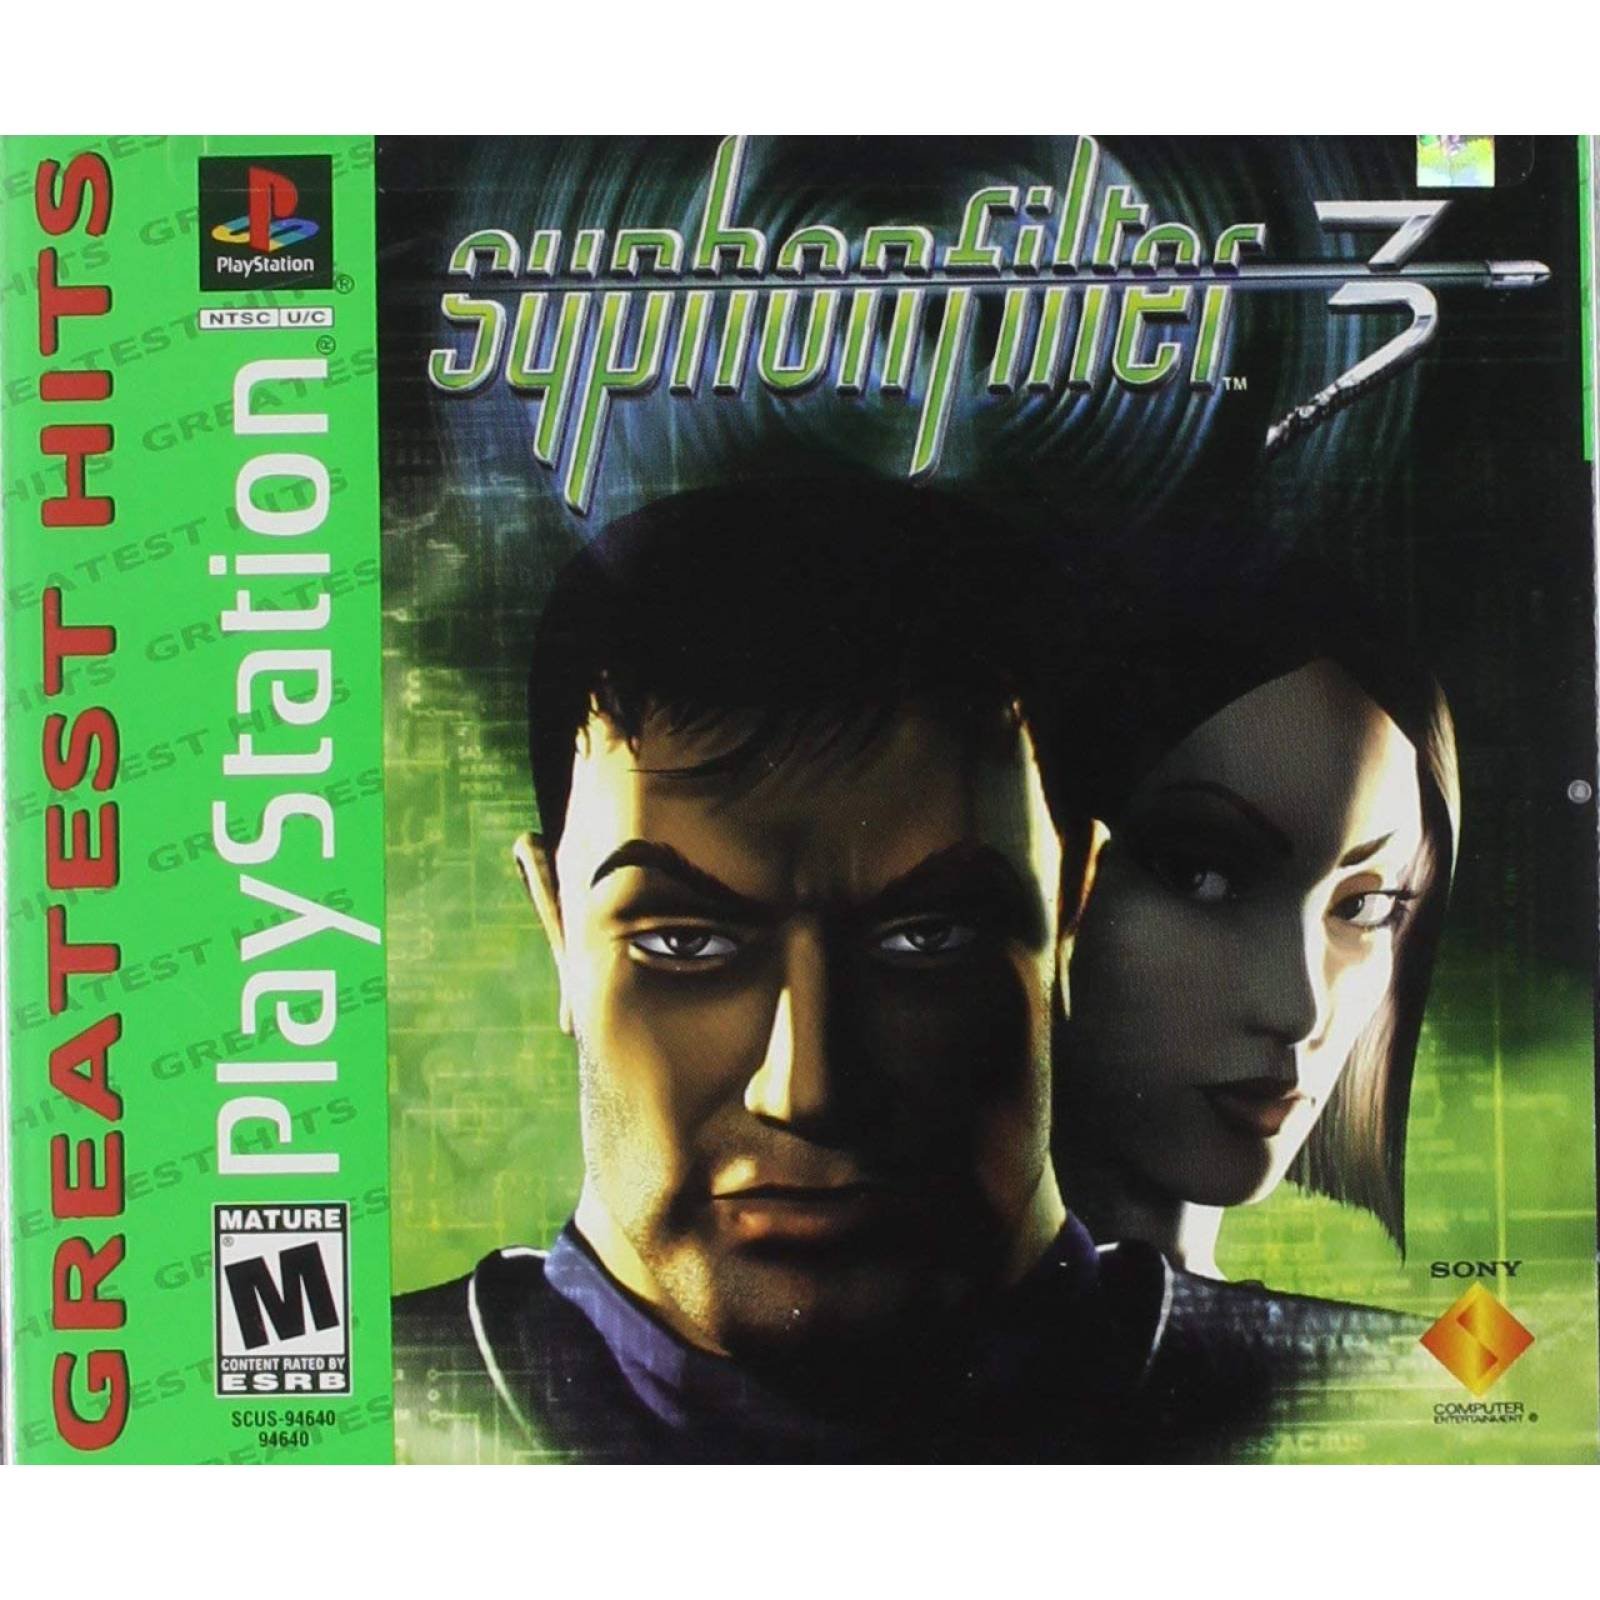 Syphon Filter 3   PlayStation One